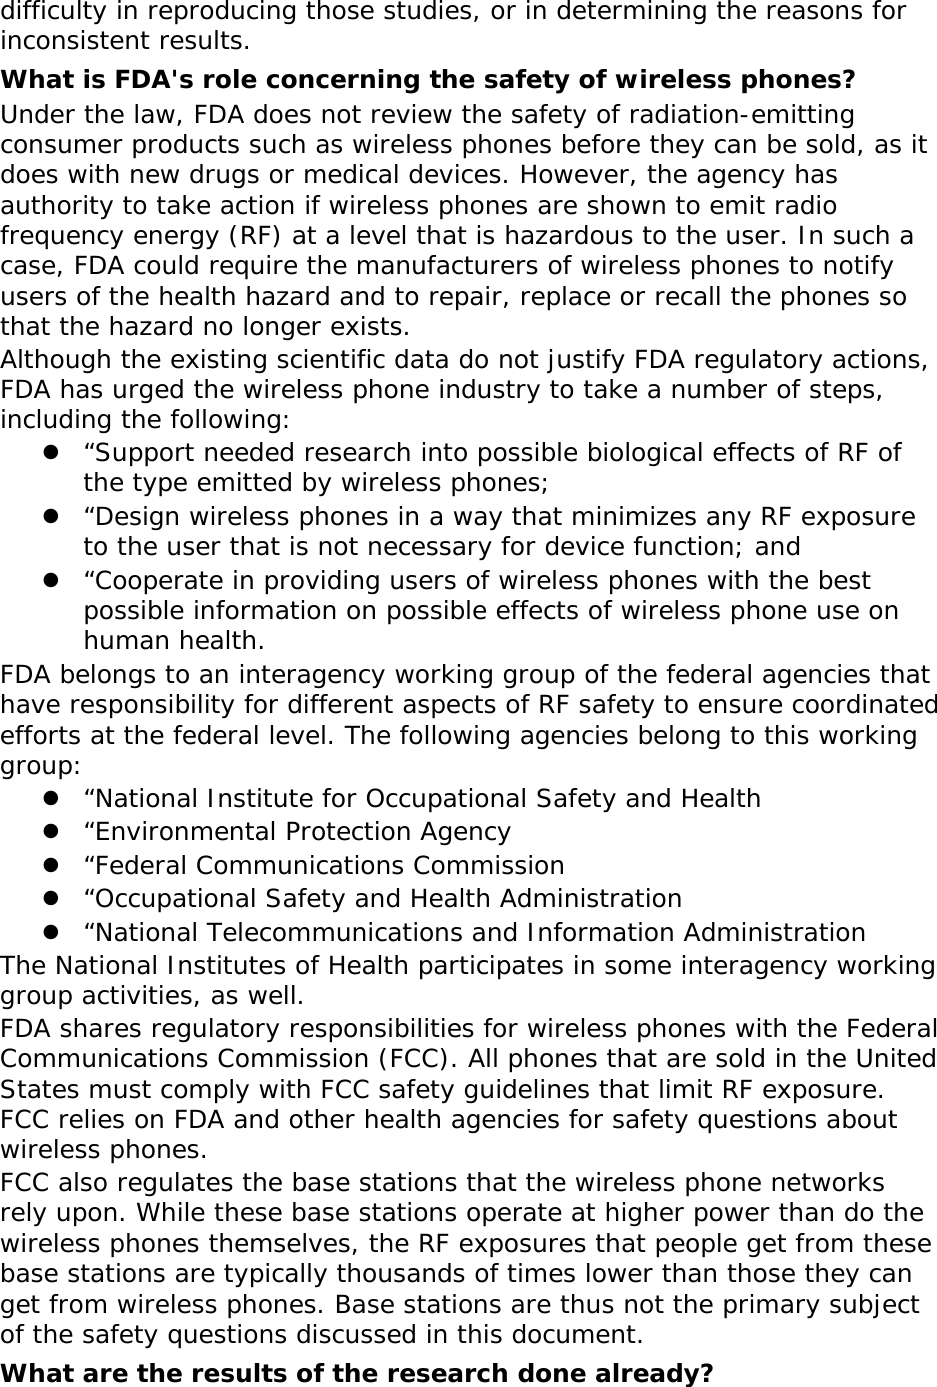 difficulty in reproducing those studies, or in determining the reasons for inconsistent results. What is FDA&apos;s role concerning the safety of wireless phones? Under the law, FDA does not review the safety of radiation-emitting consumer products such as wireless phones before they can be sold, as it does with new drugs or medical devices. However, the agency has authority to take action if wireless phones are shown to emit radio frequency energy (RF) at a level that is hazardous to the user. In such a case, FDA could require the manufacturers of wireless phones to notify users of the health hazard and to repair, replace or recall the phones so that the hazard no longer exists. Although the existing scientific data do not justify FDA regulatory actions, FDA has urged the wireless phone industry to take a number of steps, including the following:  “Support needed research into possible biological effects of RF of the type emitted by wireless phones;  “Design wireless phones in a way that minimizes any RF exposure to the user that is not necessary for device function; and  “Cooperate in providing users of wireless phones with the best possible information on possible effects of wireless phone use on human health. FDA belongs to an interagency working group of the federal agencies that have responsibility for different aspects of RF safety to ensure coordinated efforts at the federal level. The following agencies belong to this working group:  “National Institute for Occupational Safety and Health  “Environmental Protection Agency  “Federal Communications Commission  “Occupational Safety and Health Administration  “National Telecommunications and Information Administration The National Institutes of Health participates in some interagency working group activities, as well. FDA shares regulatory responsibilities for wireless phones with the Federal Communications Commission (FCC). All phones that are sold in the United States must comply with FCC safety guidelines that limit RF exposure. FCC relies on FDA and other health agencies for safety questions about wireless phones. FCC also regulates the base stations that the wireless phone networks rely upon. While these base stations operate at higher power than do the wireless phones themselves, the RF exposures that people get from these base stations are typically thousands of times lower than those they can get from wireless phones. Base stations are thus not the primary subject of the safety questions discussed in this document. What are the results of the research done already? 